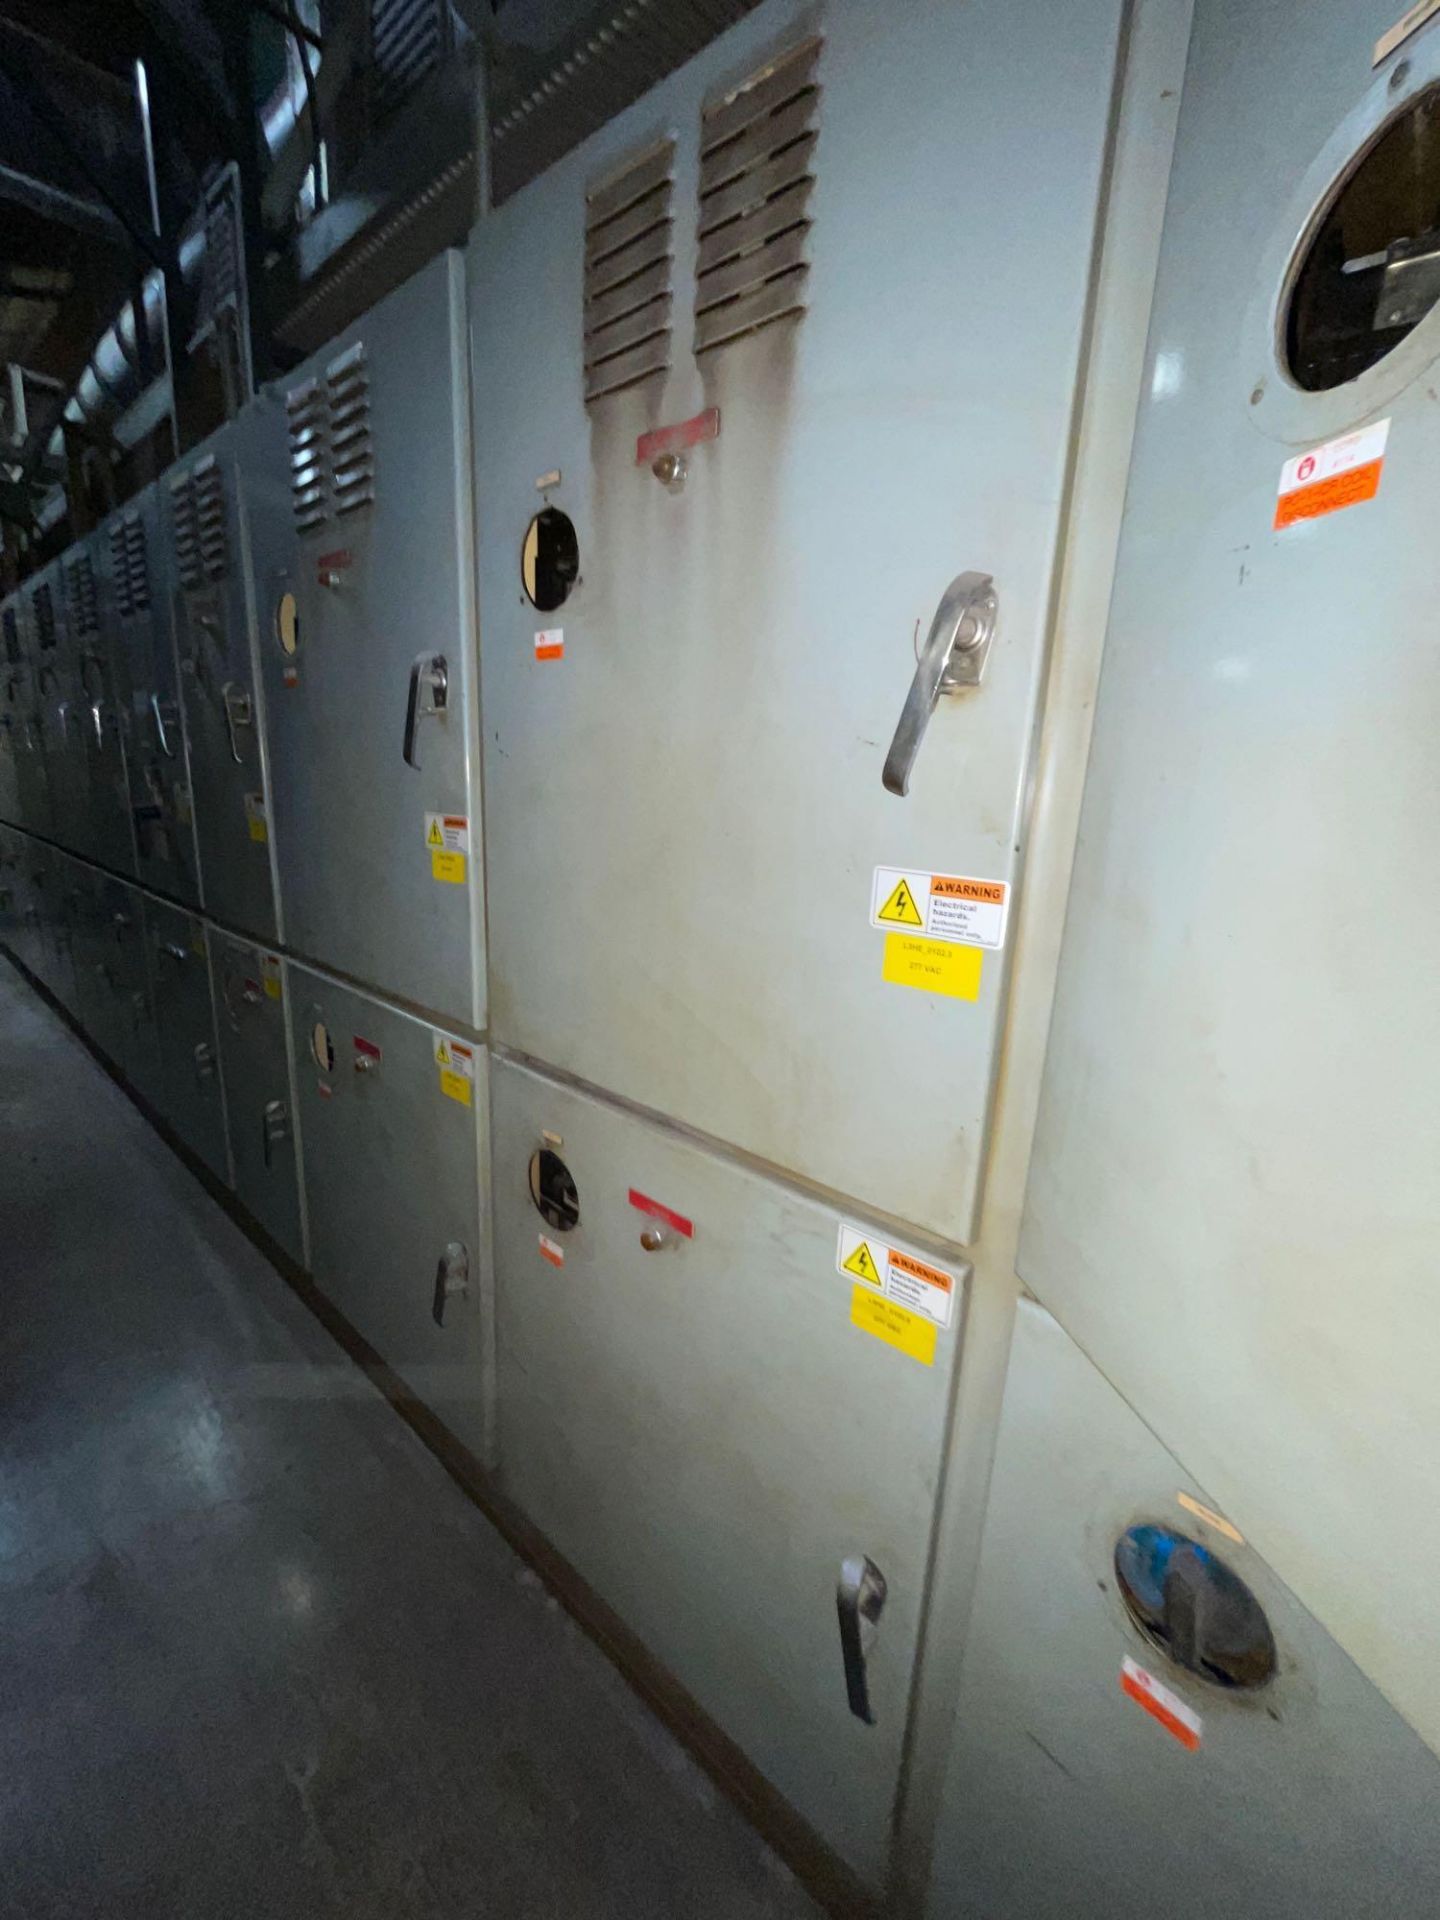 Glass Pane Bending Oven Furnace with Electrical Cabinets - Image 11 of 68